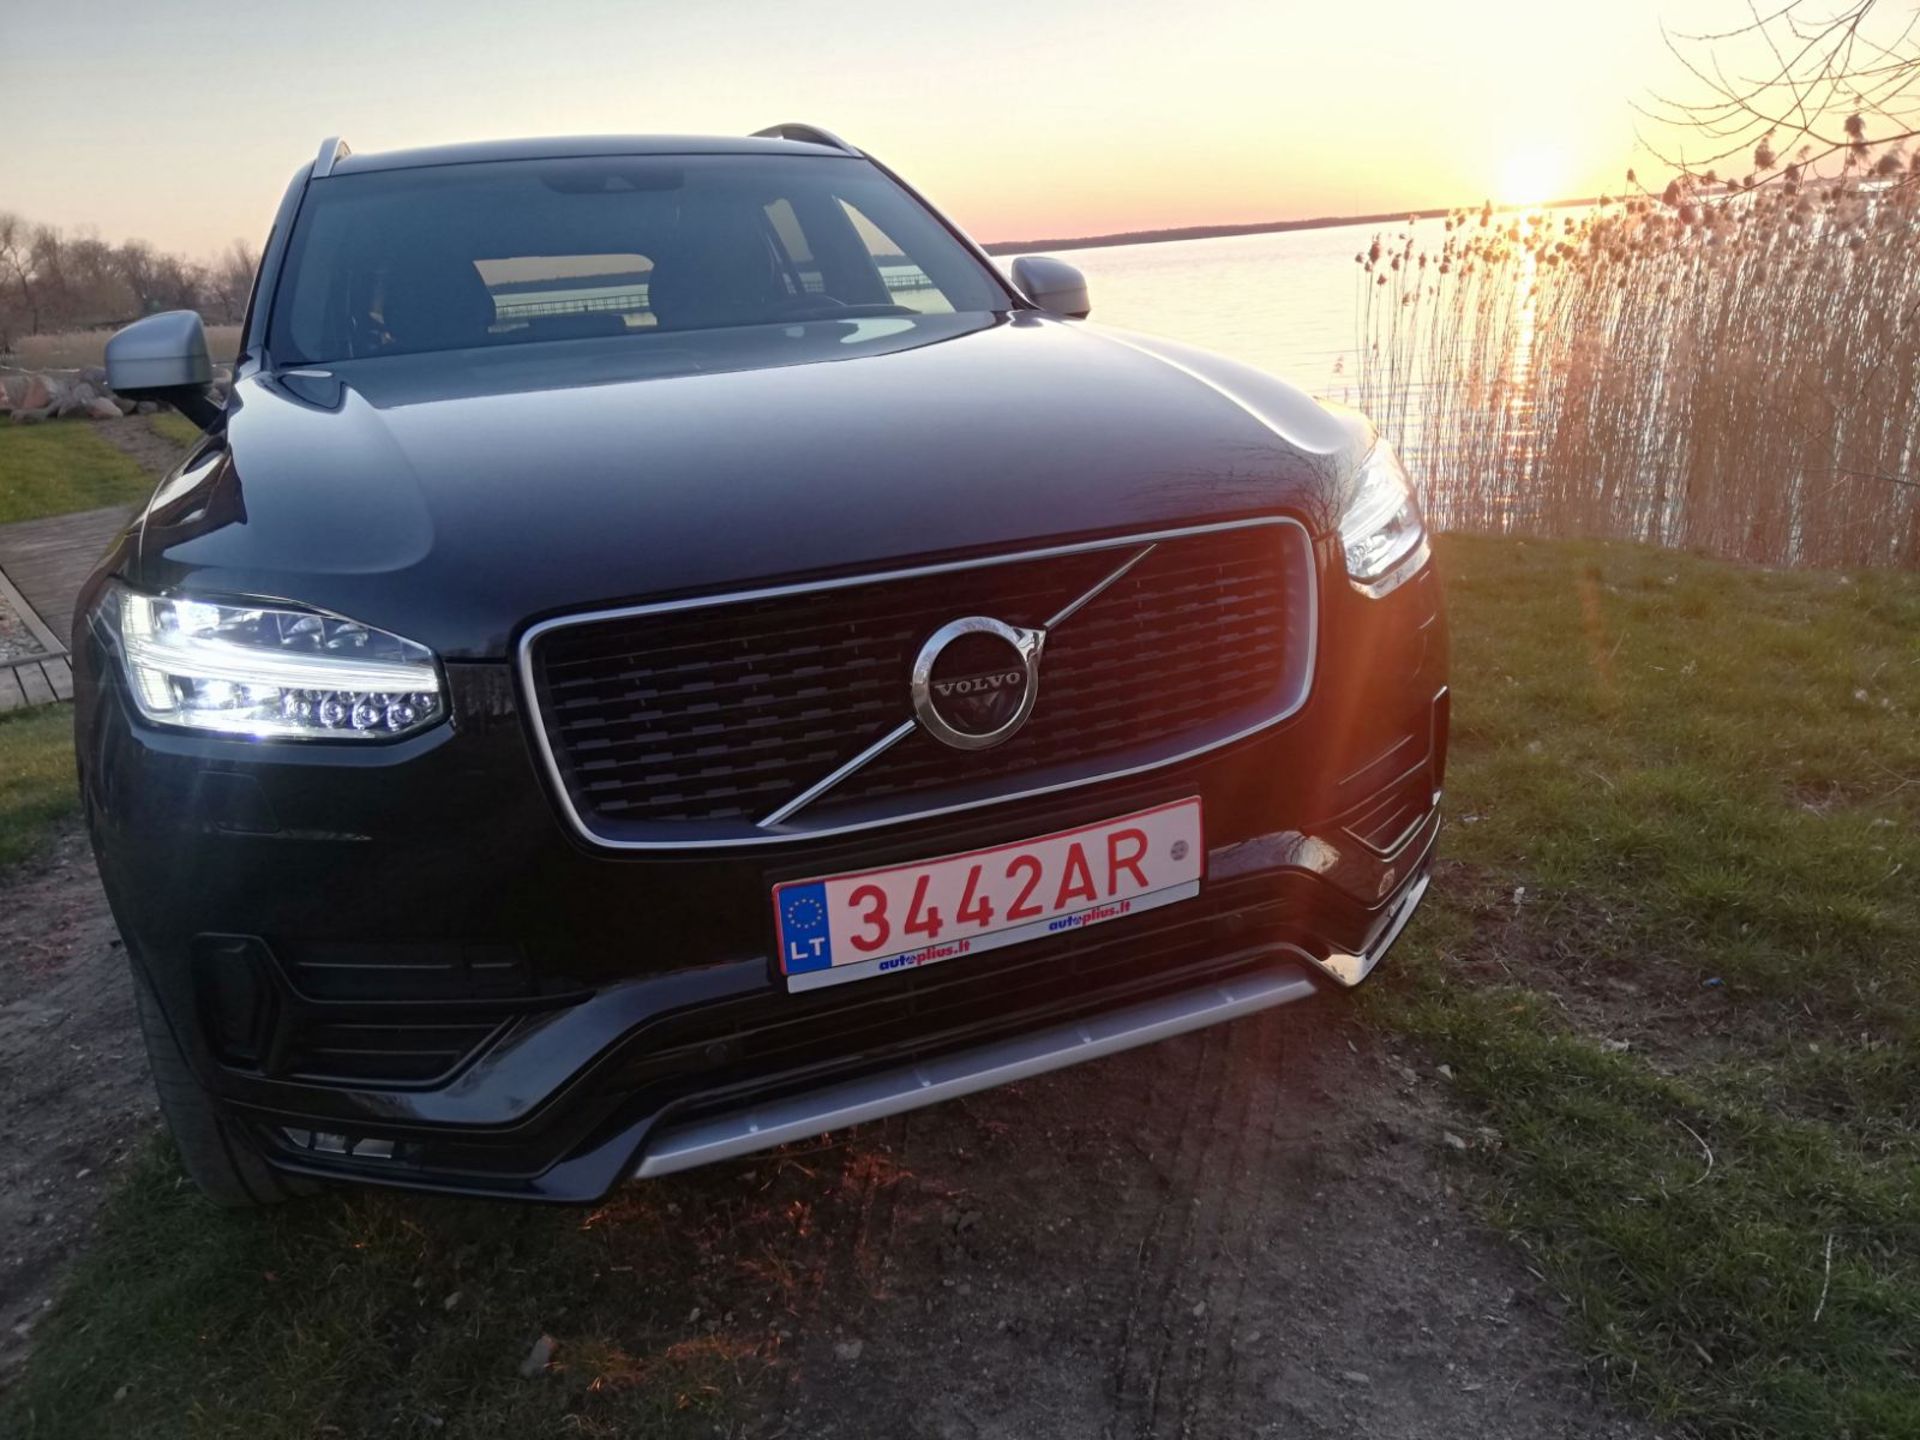 2017 VOLVO XC90 T6 AWD LEFT HAND DRIVE R-DESIGN 2.0L PETROL AUTOMATIC, 45,000 KM, DRIVES LIKE NEW - Image 6 of 20